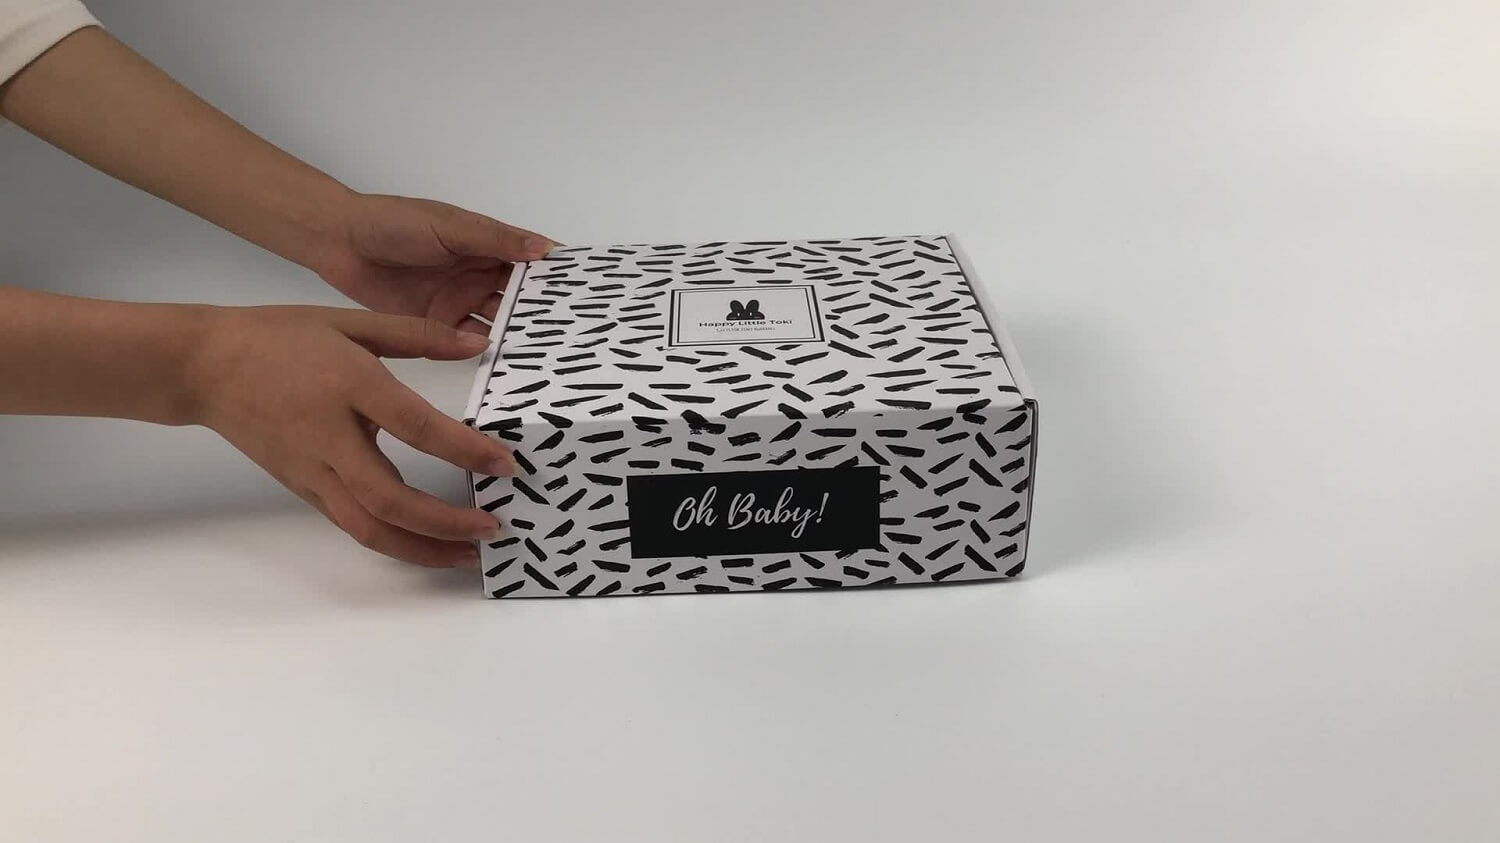 How are custom mailer boxes the right choice for your business